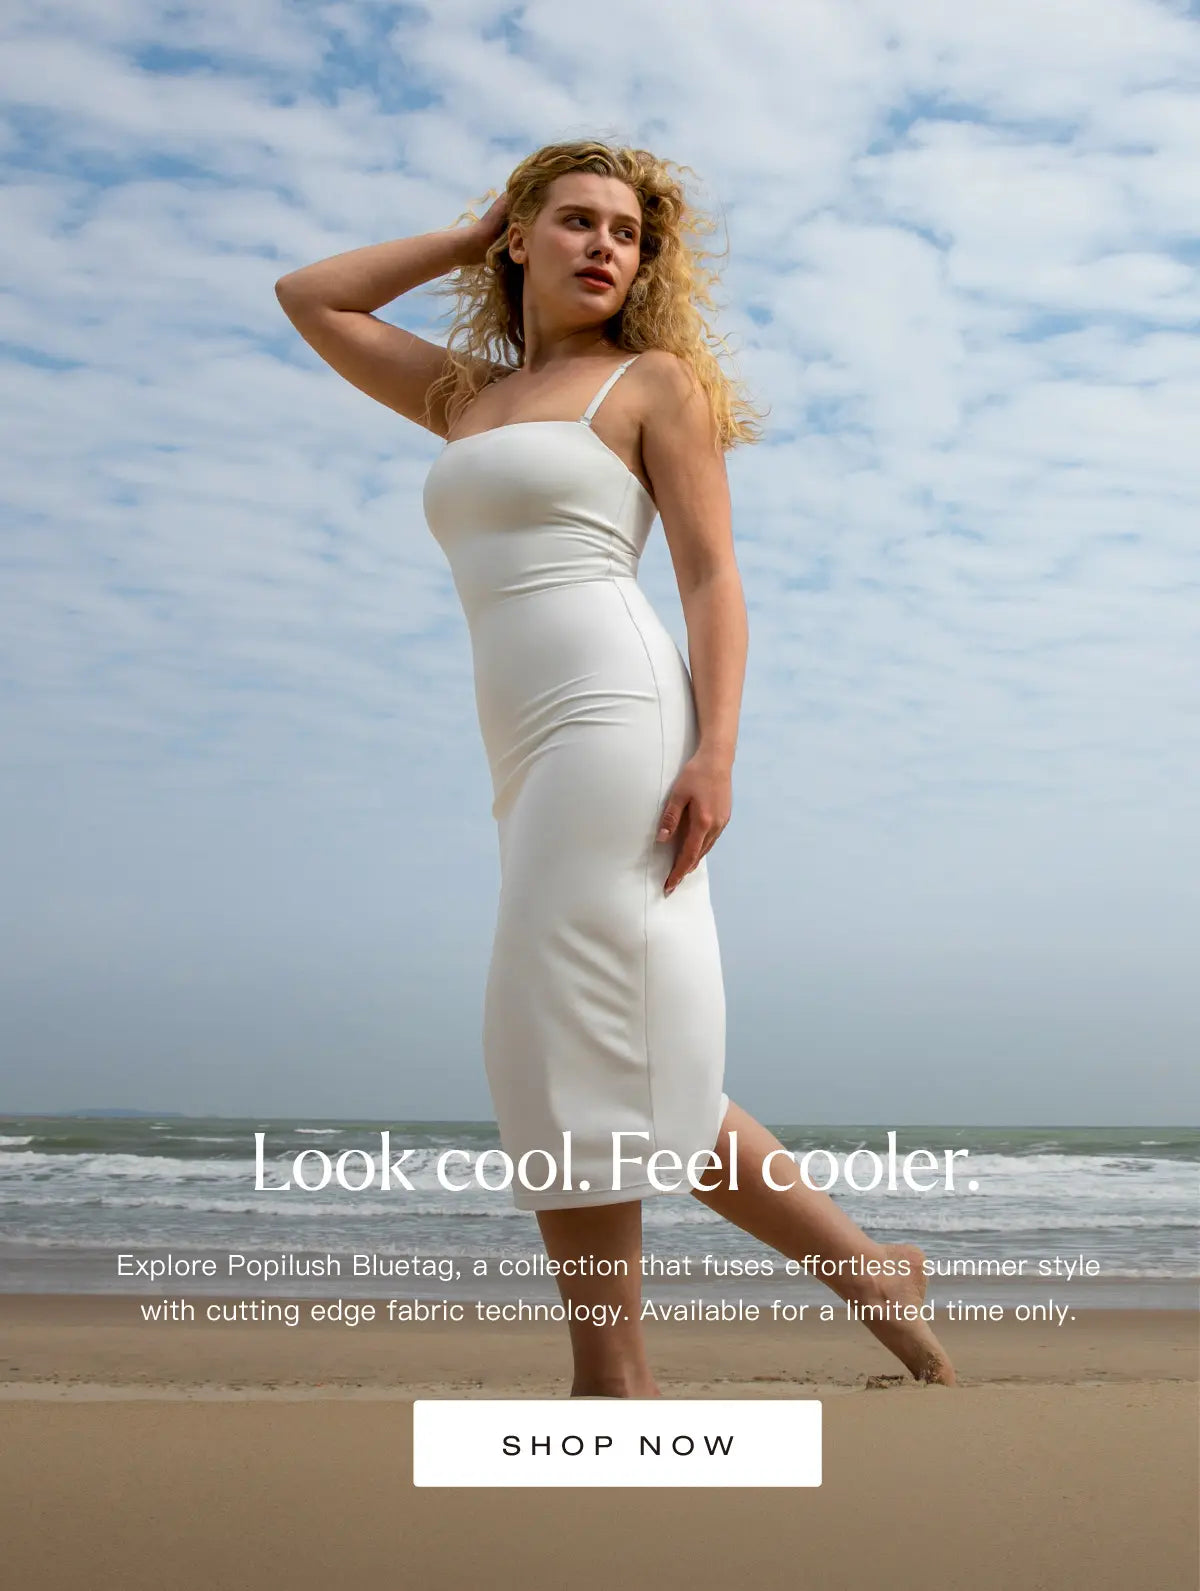 Built-in shapewear made with cooling fabric derived from oyster shells.